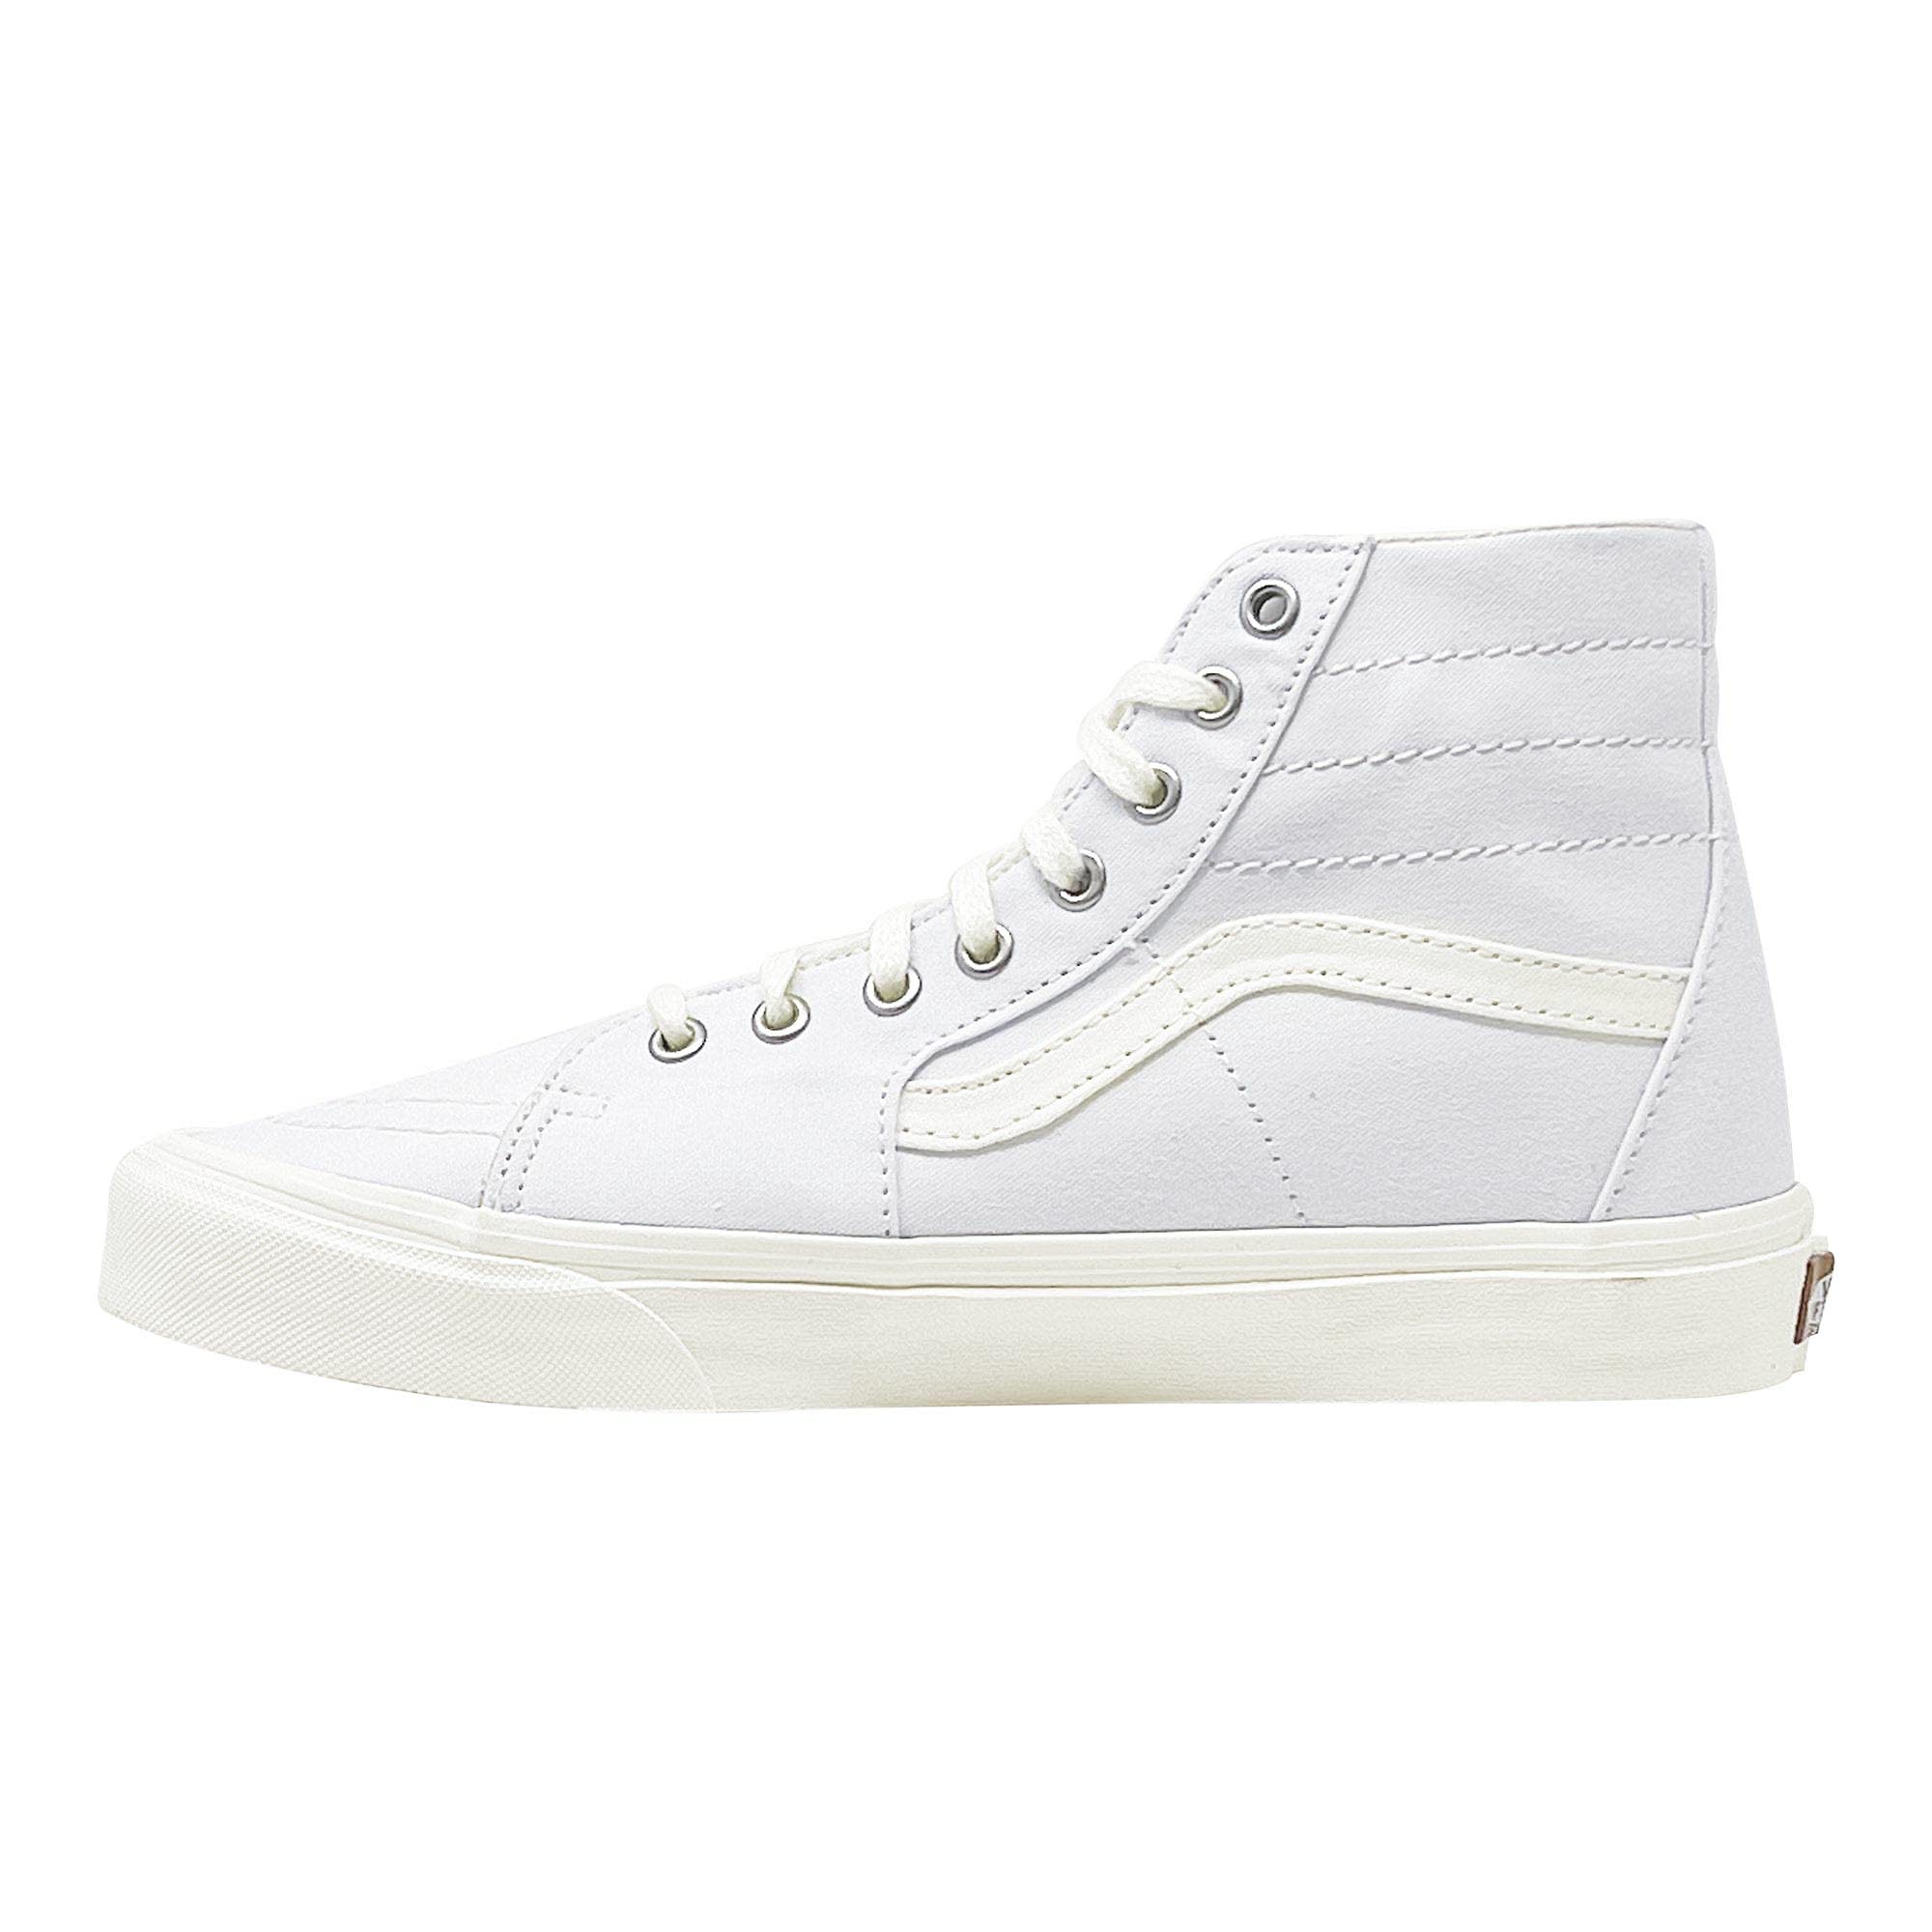 Vans Sk8-Hi Unisex Casual High-Top Skate Shoes Comfortable and Durable in Signature Waffle Rubber Sole Medium WhiteNatura